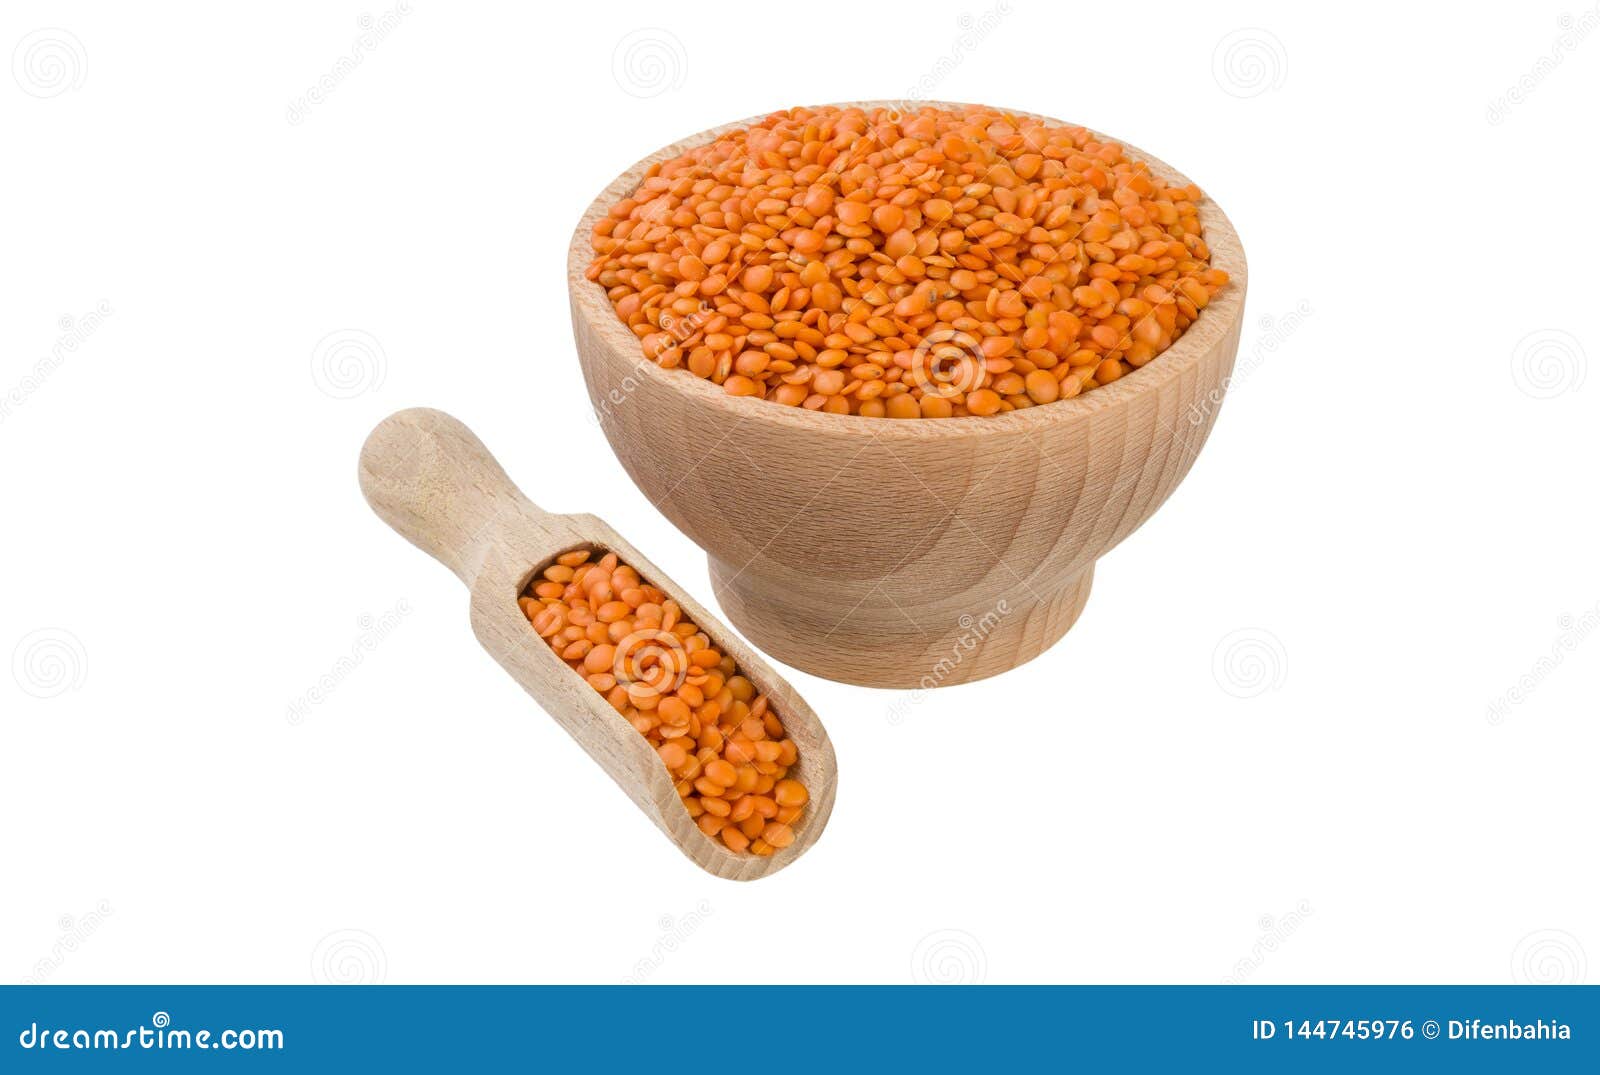 red lentils in wooden bowl and scoop  on white background. nutrition. bio. natural food ingredient